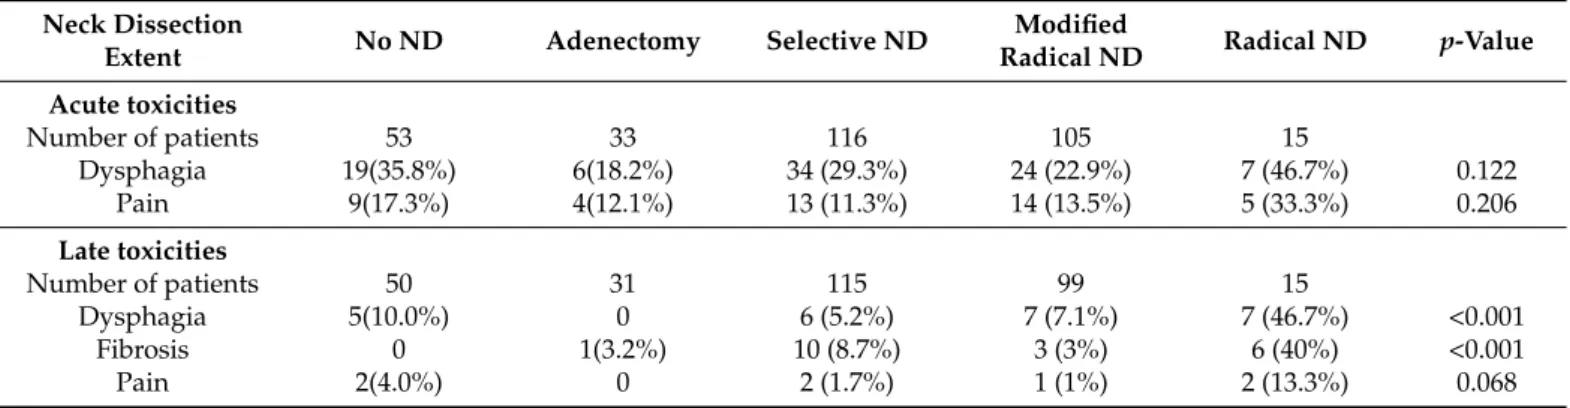 Table 4. Impact of neck dissection on grade III-IV acute and late toxicities.